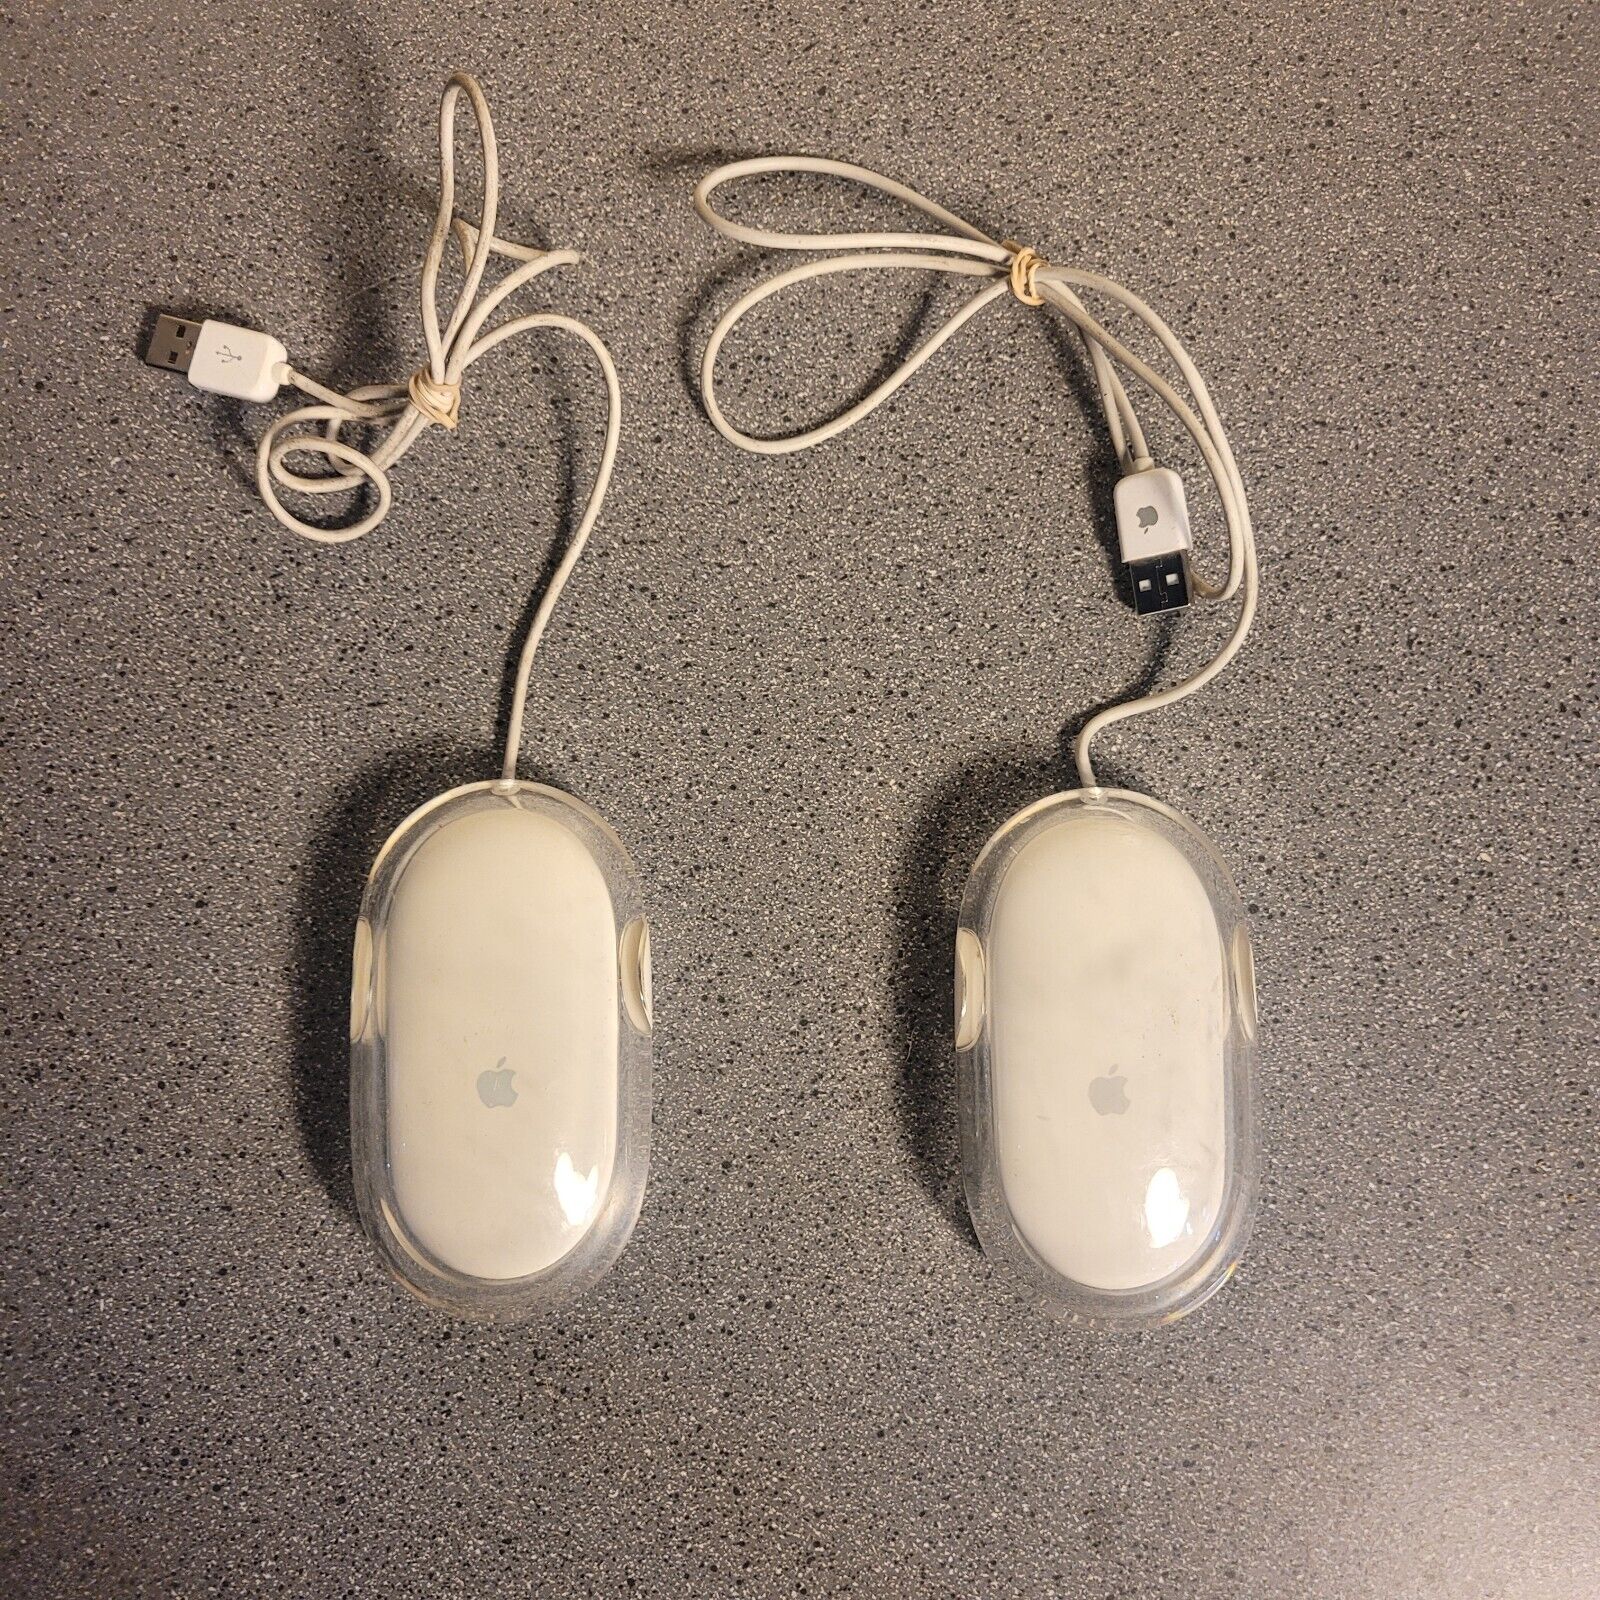 Lot of Two (2) Genuine Apple USB Wired Optical White/Clear Mouse Tested & Works